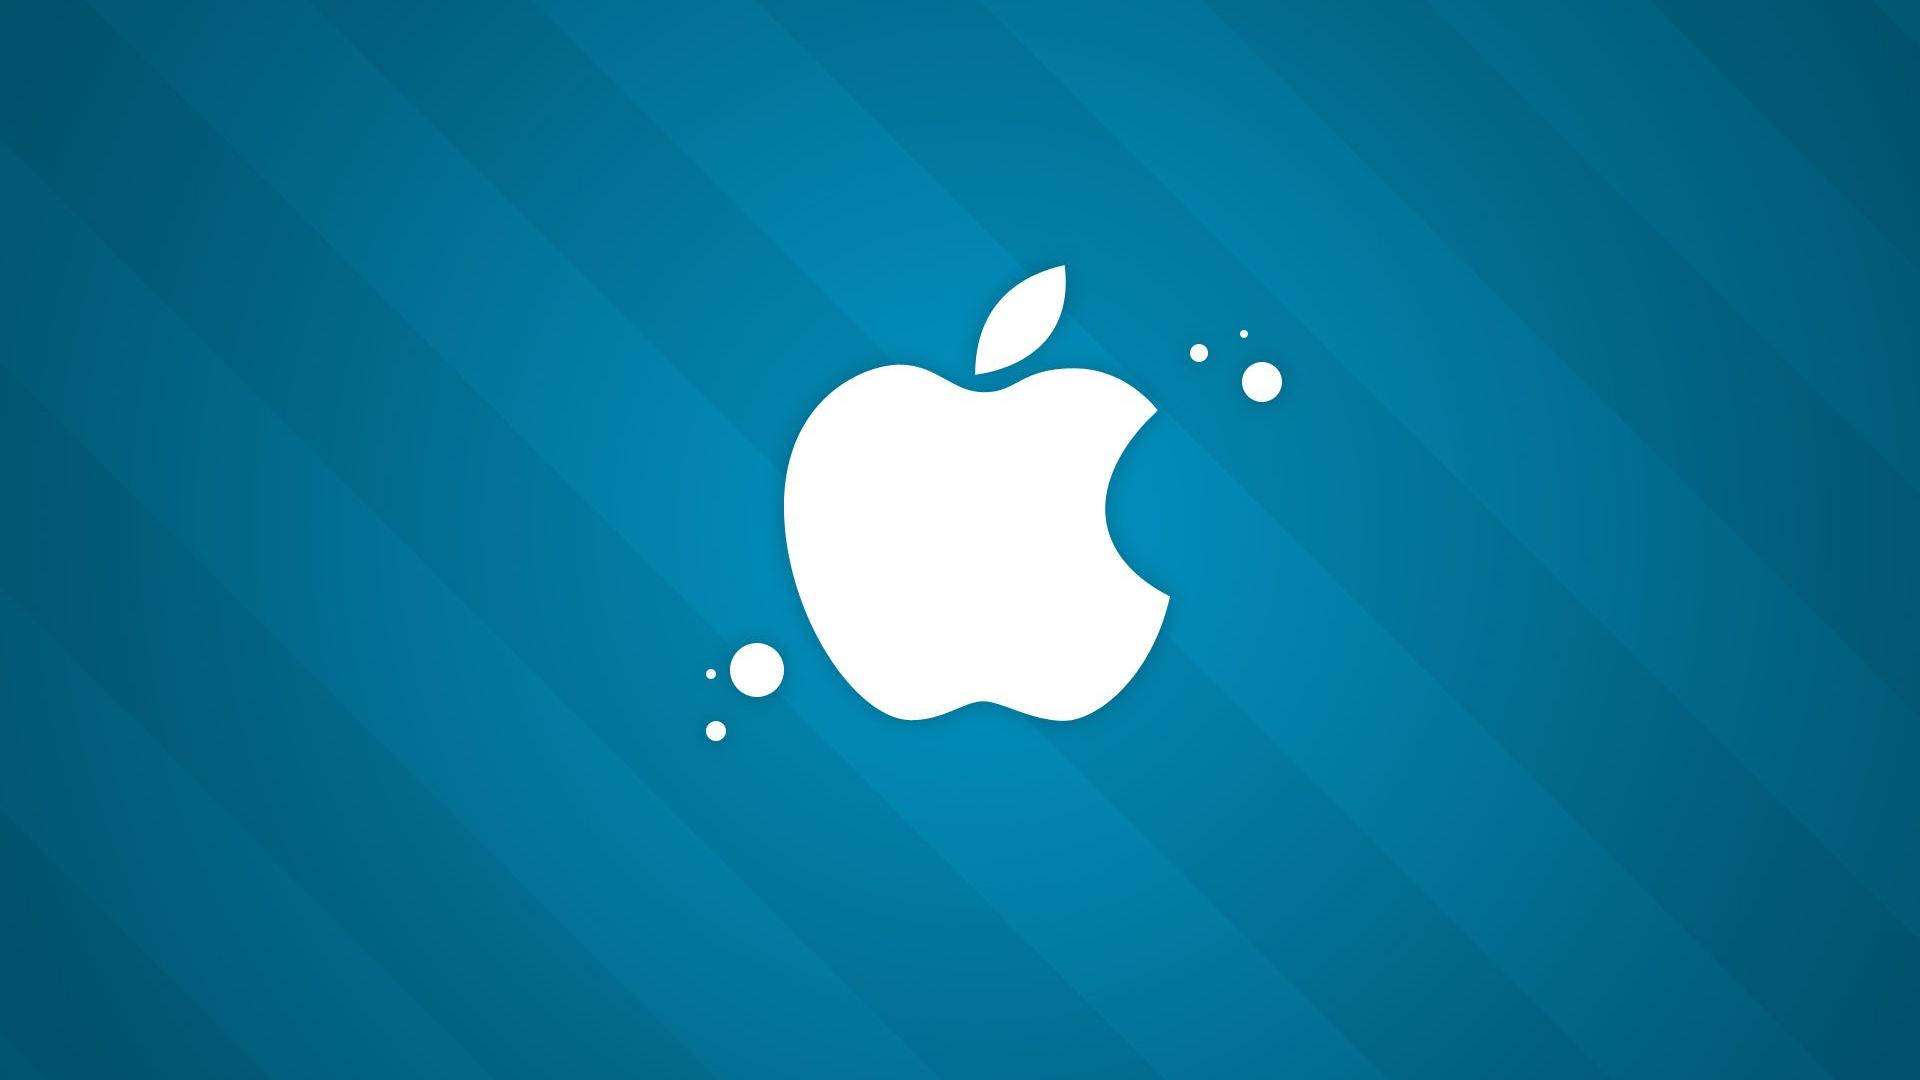 Apple Logo 4k On Blue Background Picture